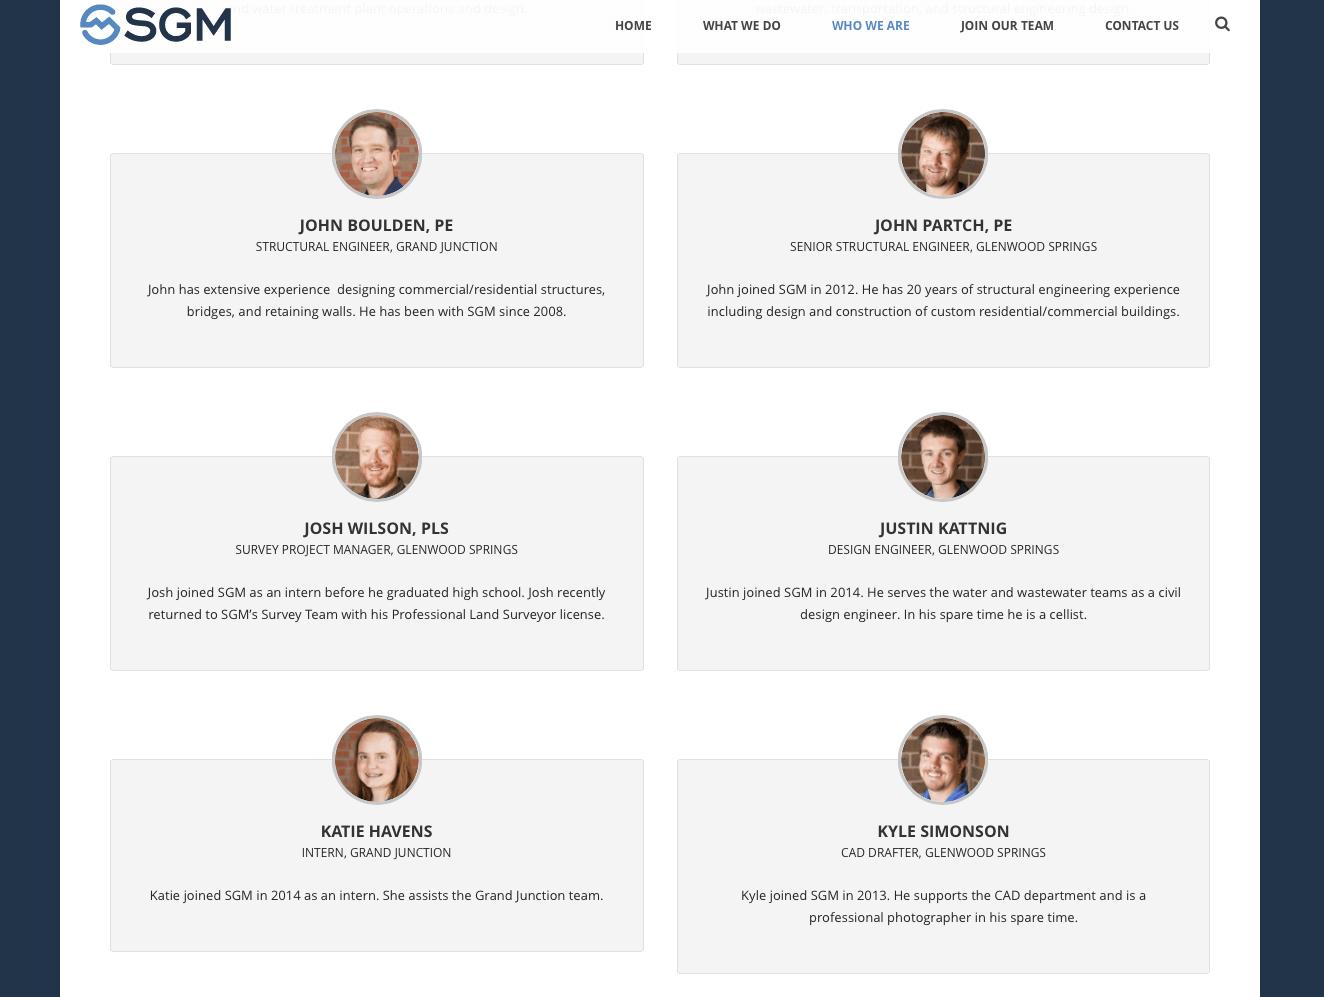 SGM Employee Head Shots and Group Photos